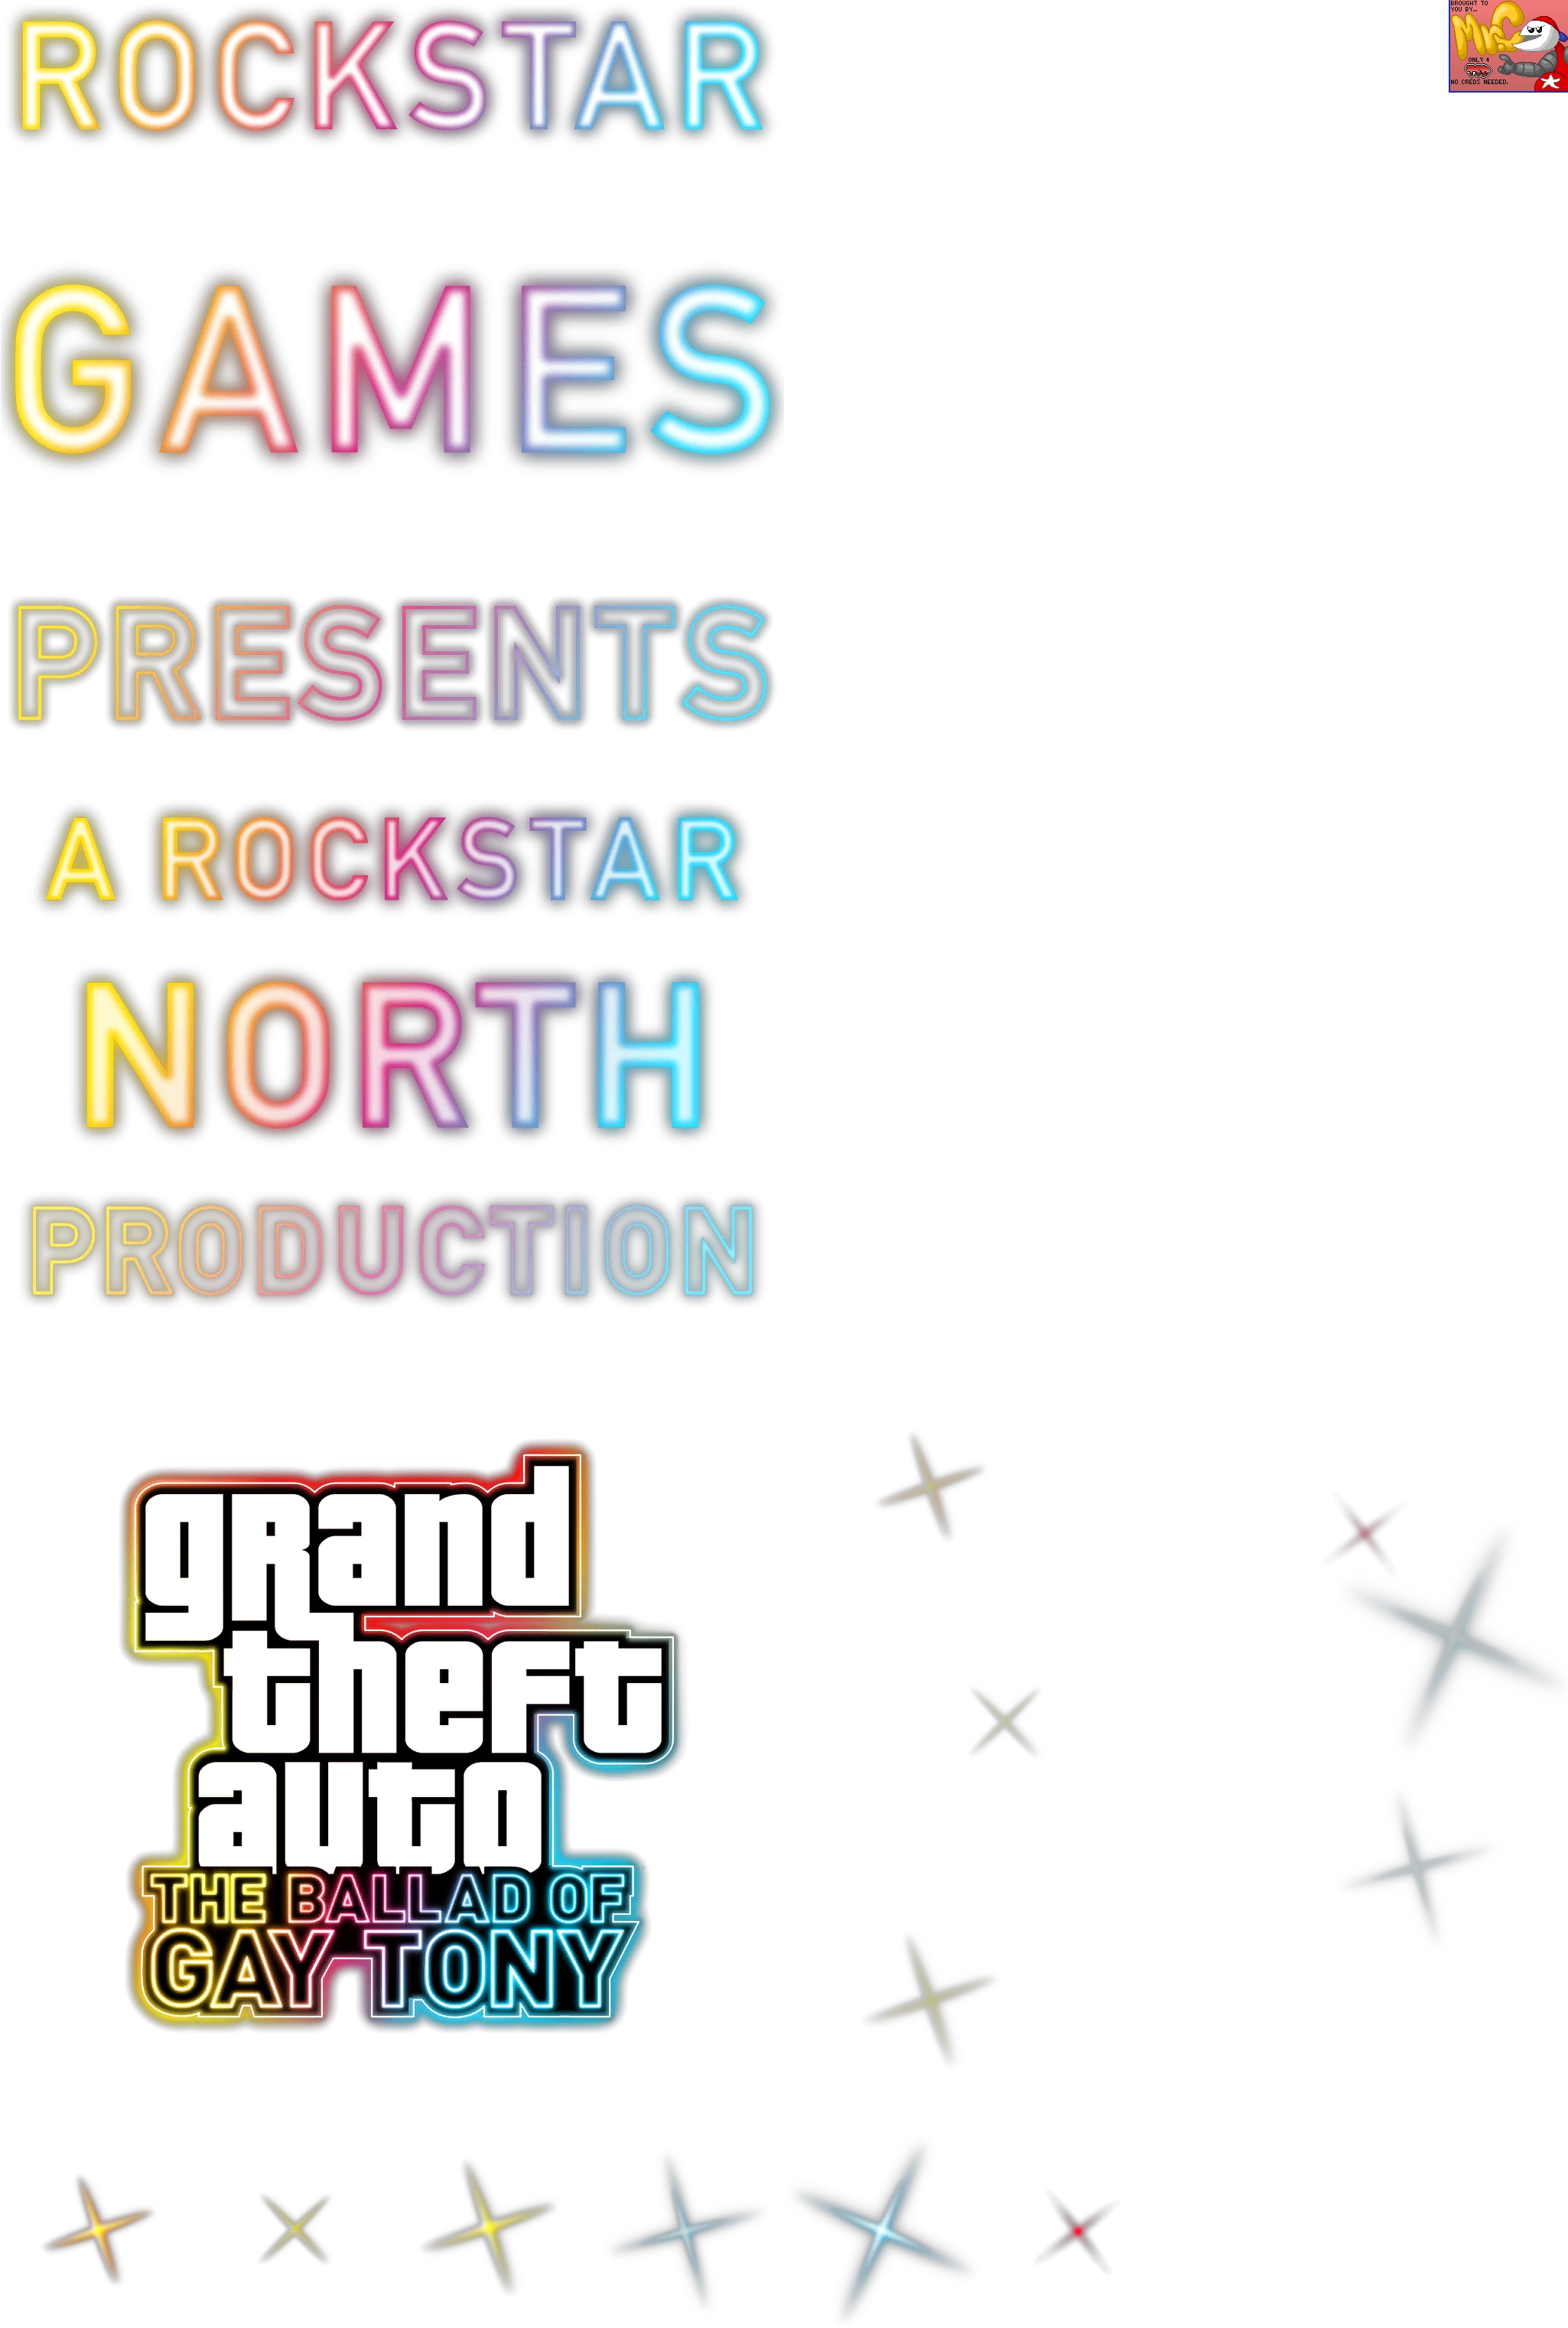 Grand Theft Auto 4: Episodes from Liberty City - Intro Text (The Ballad of Gay Tony)